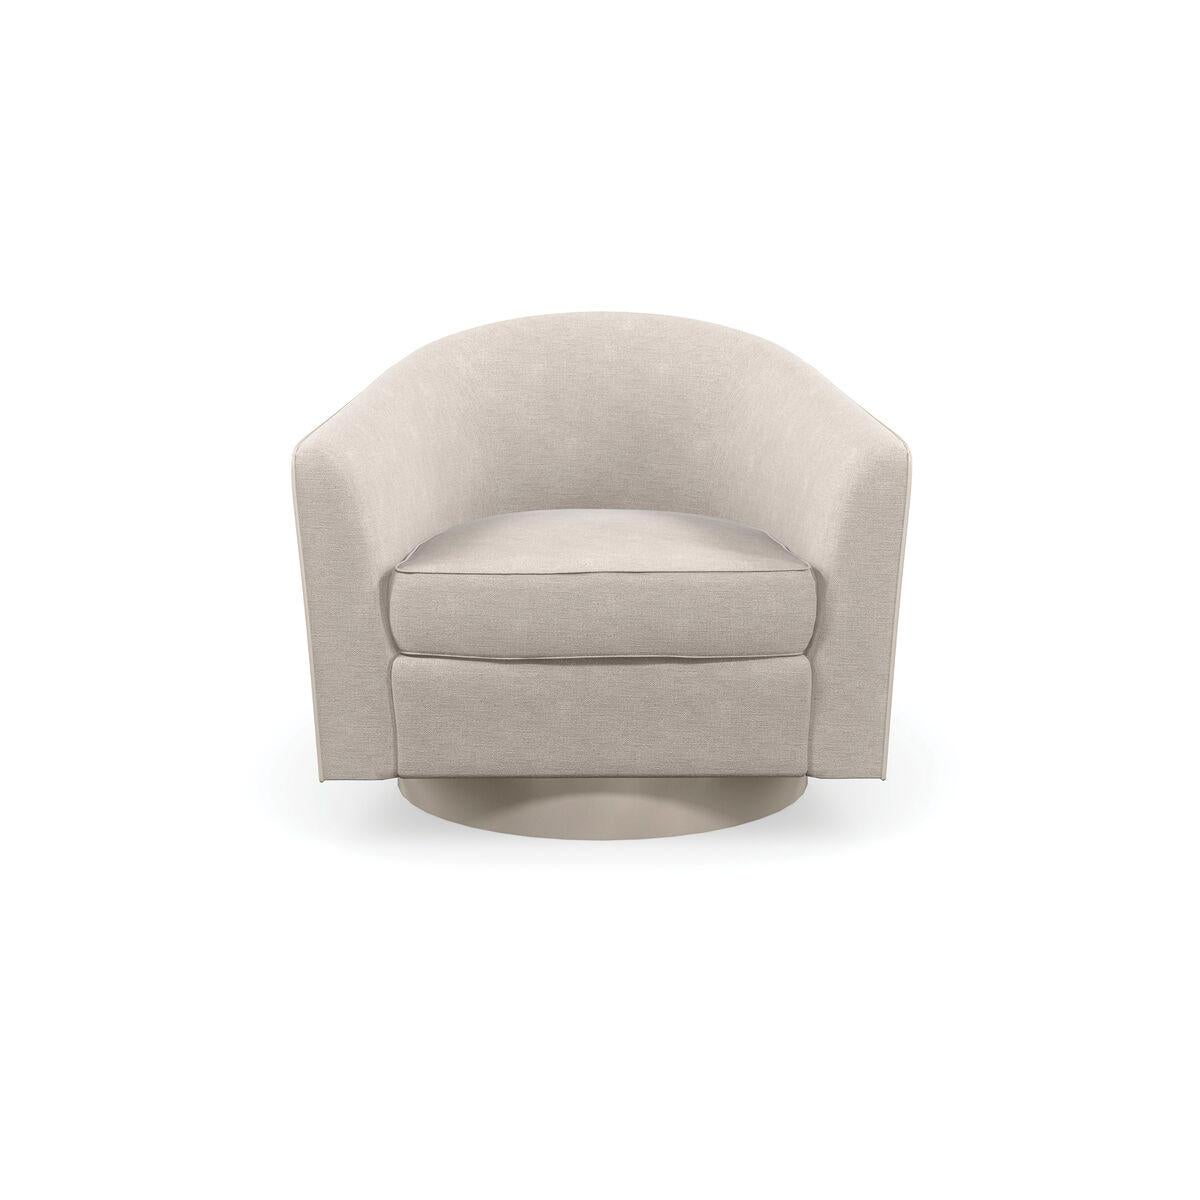 This softly curved swivel chair introduces a free-flowing, organic style to seating areas. A quilted ginkgo leaf pattern fanning out along the back creates repetition and subtle movement, accented by a cream-colored contrast welt and plinth base